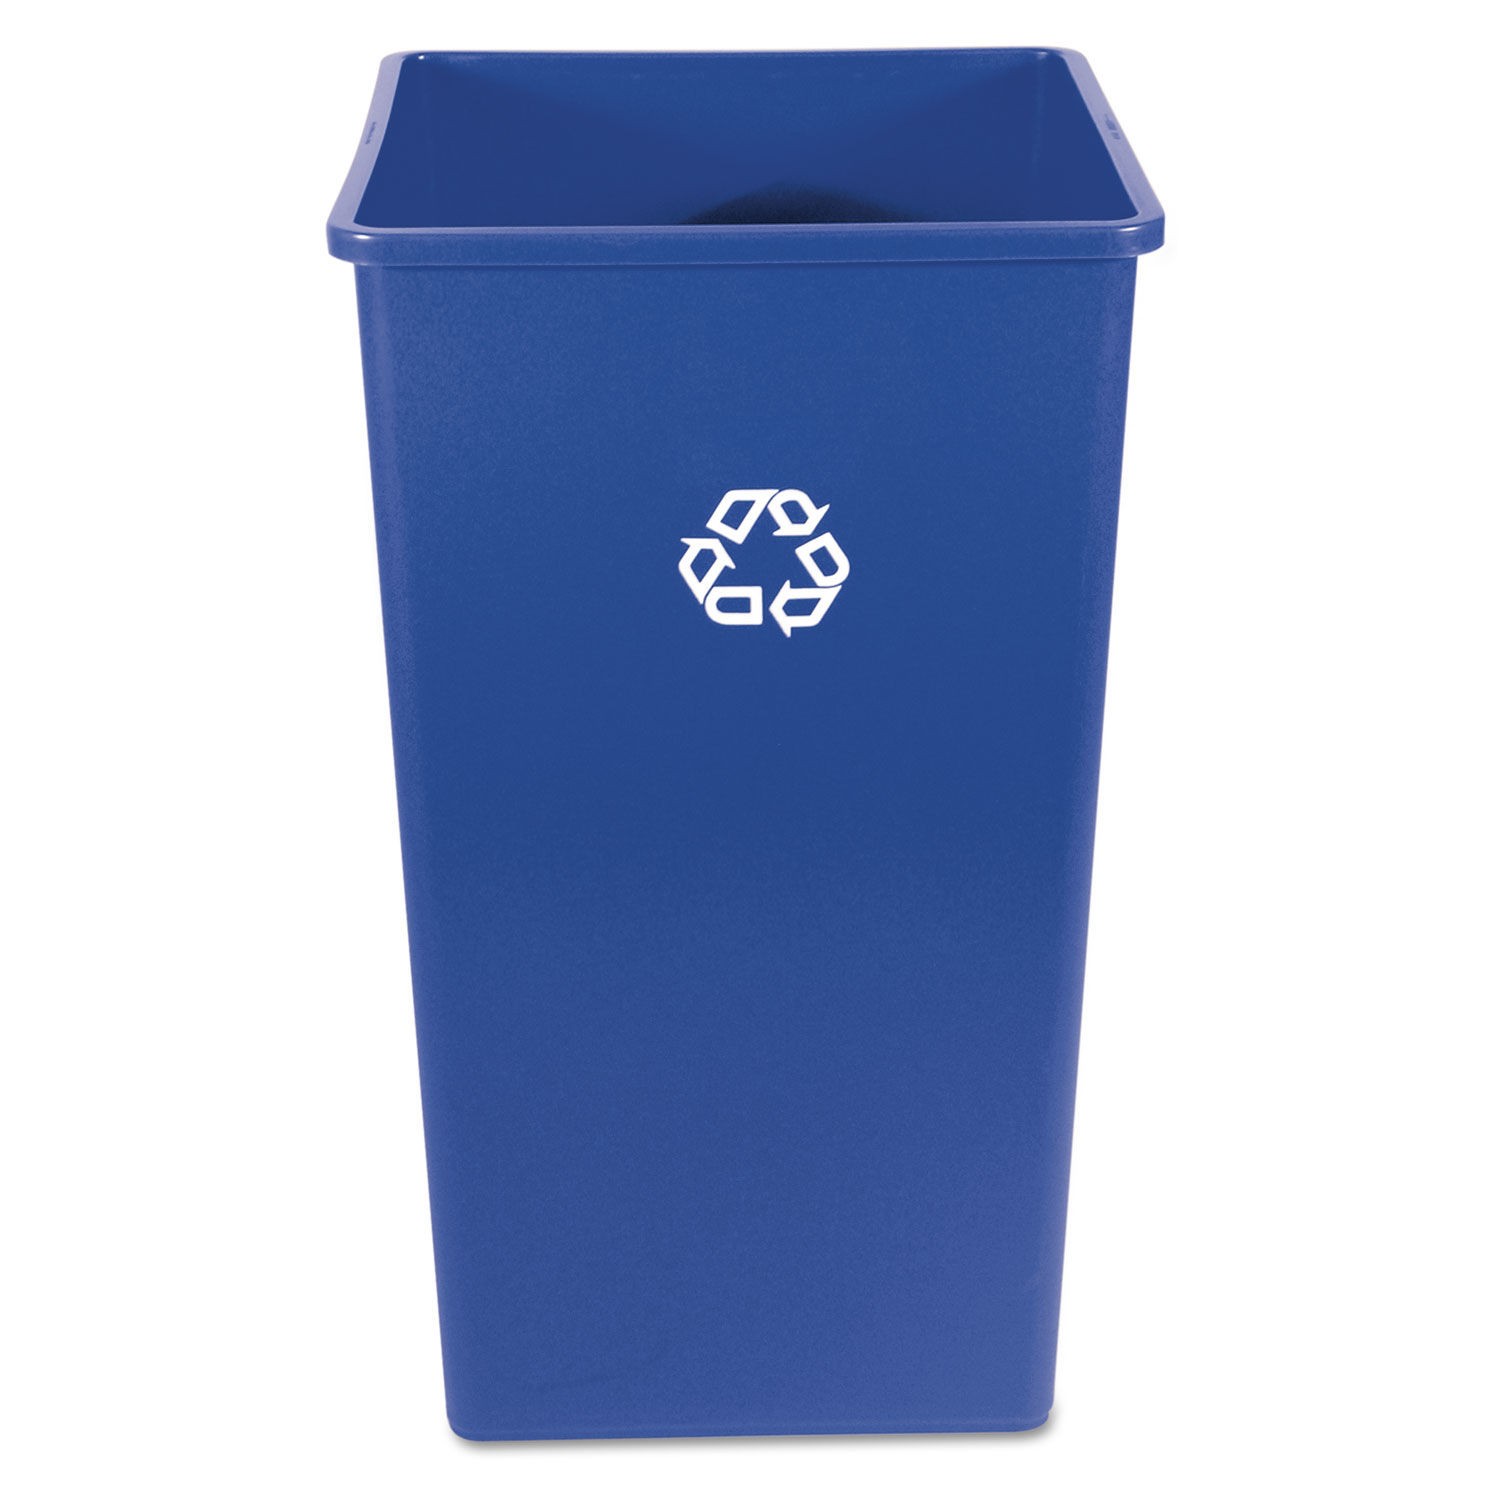 Square Recycling Can,  50 Gallon, Blue